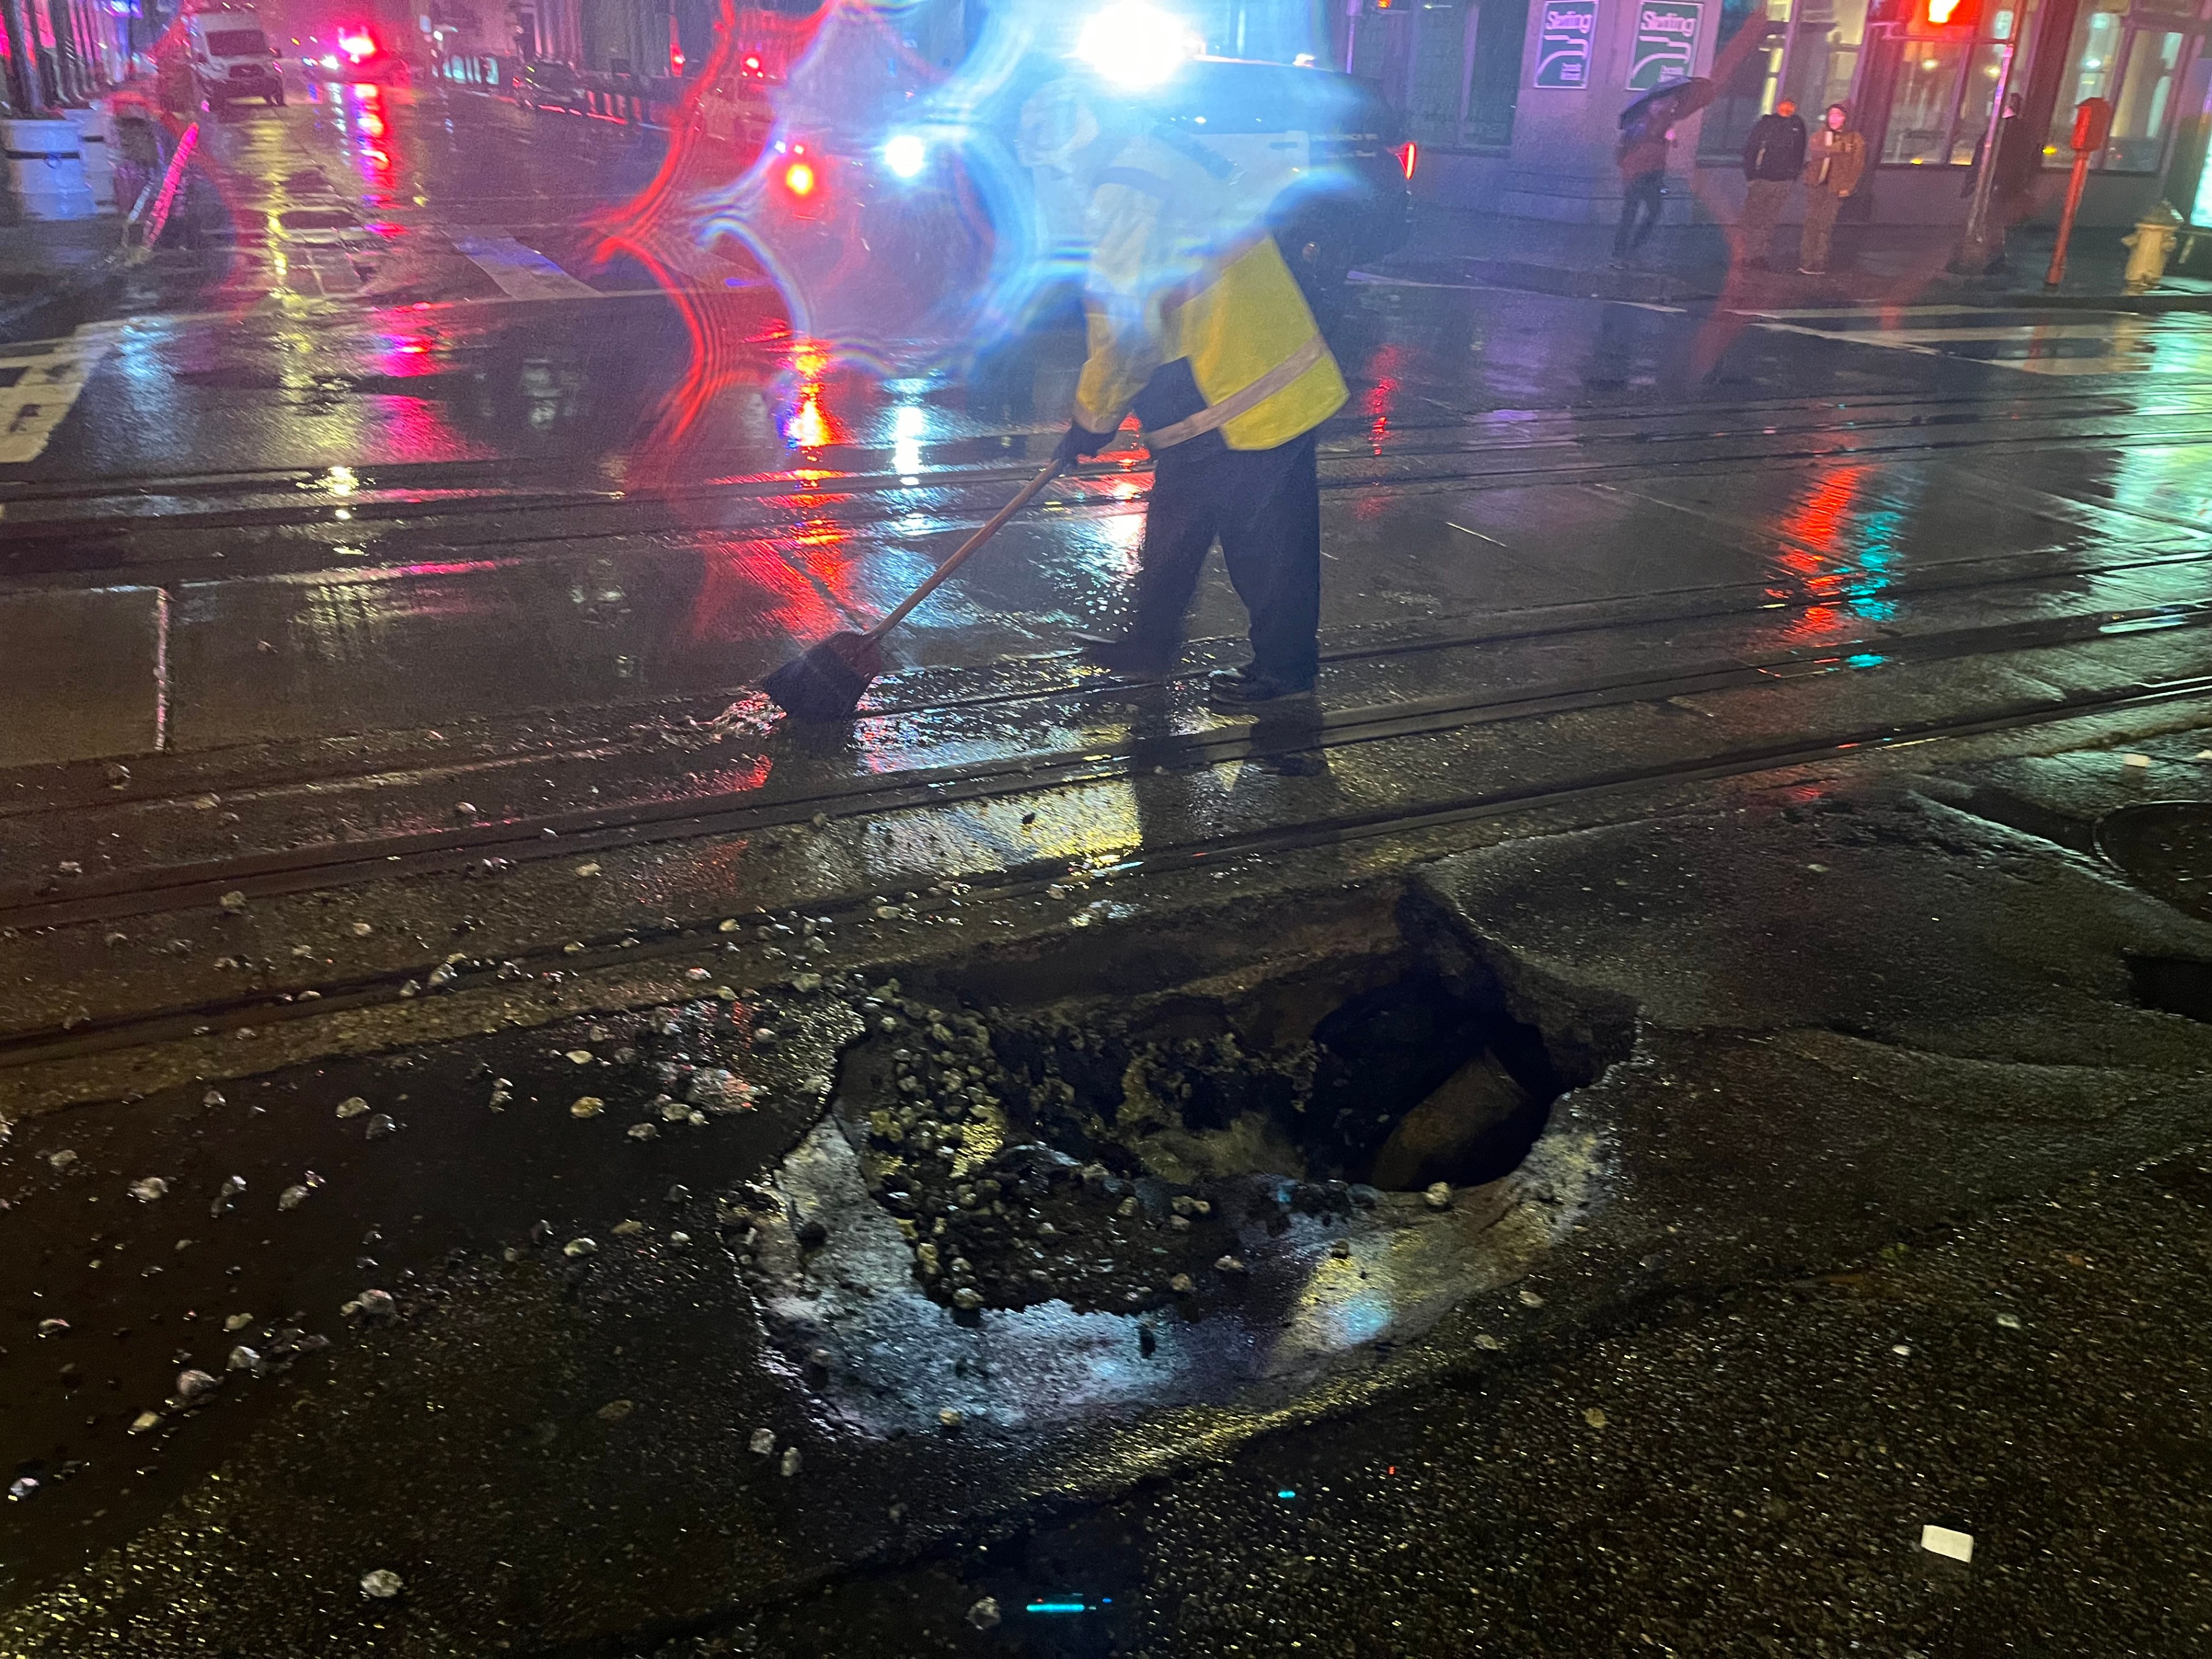 A worker uses a broom to brush water on a cable car track next to a sinkhole